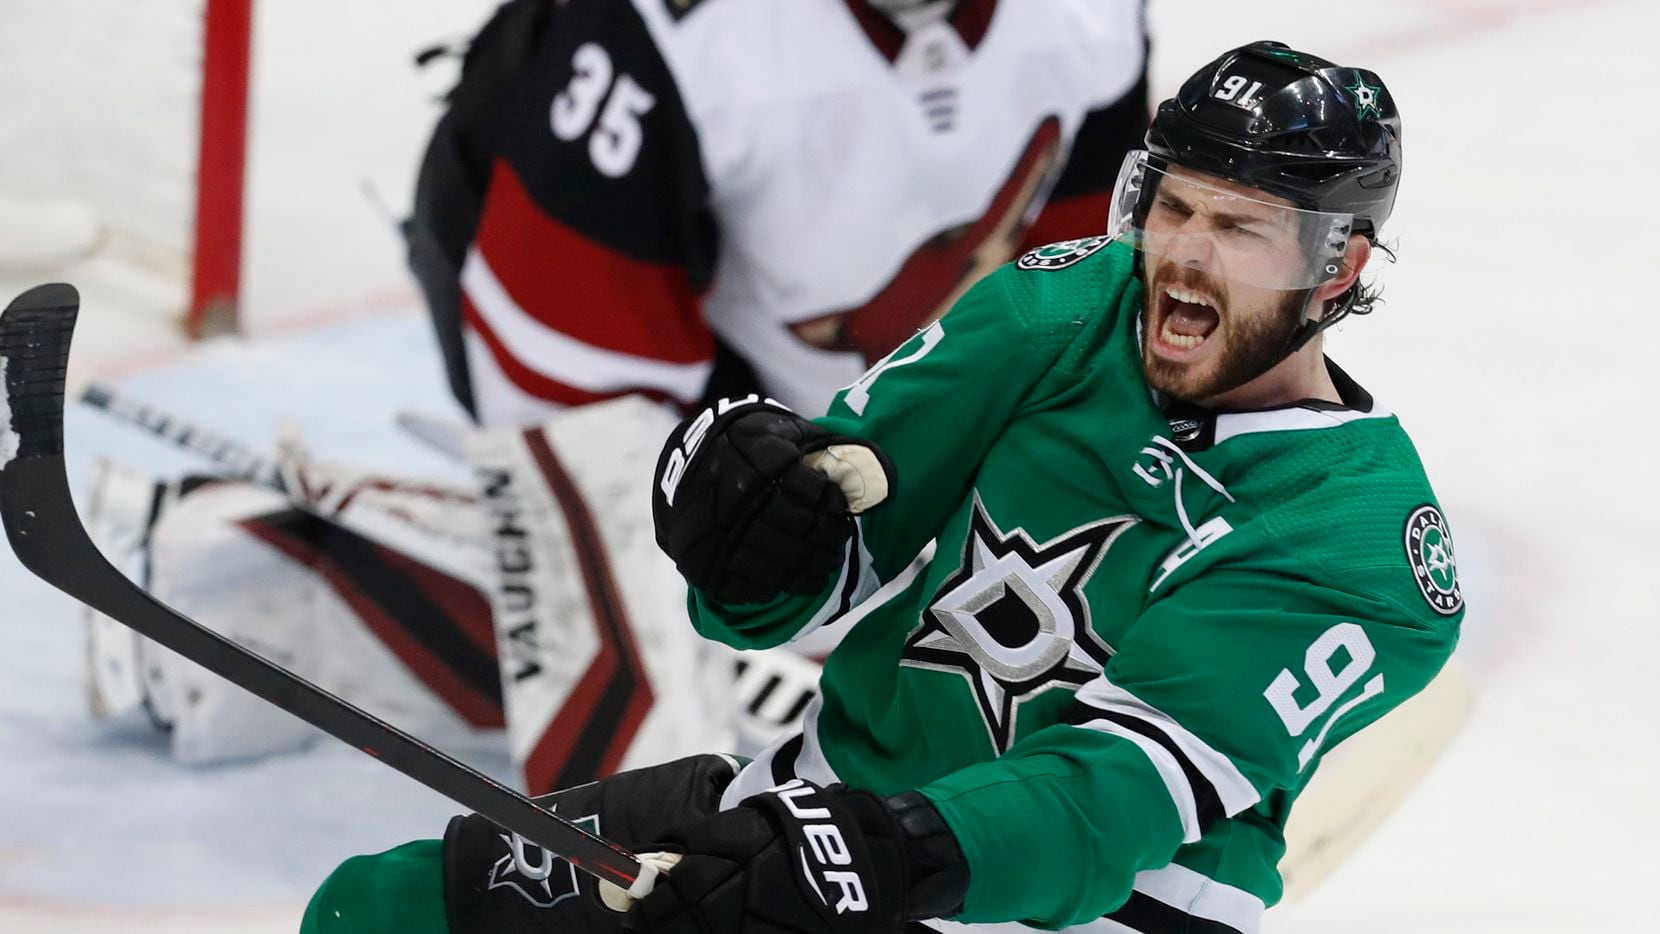 Stars Notebook Tyler Seguins Hot Streak Continues With Game Winning